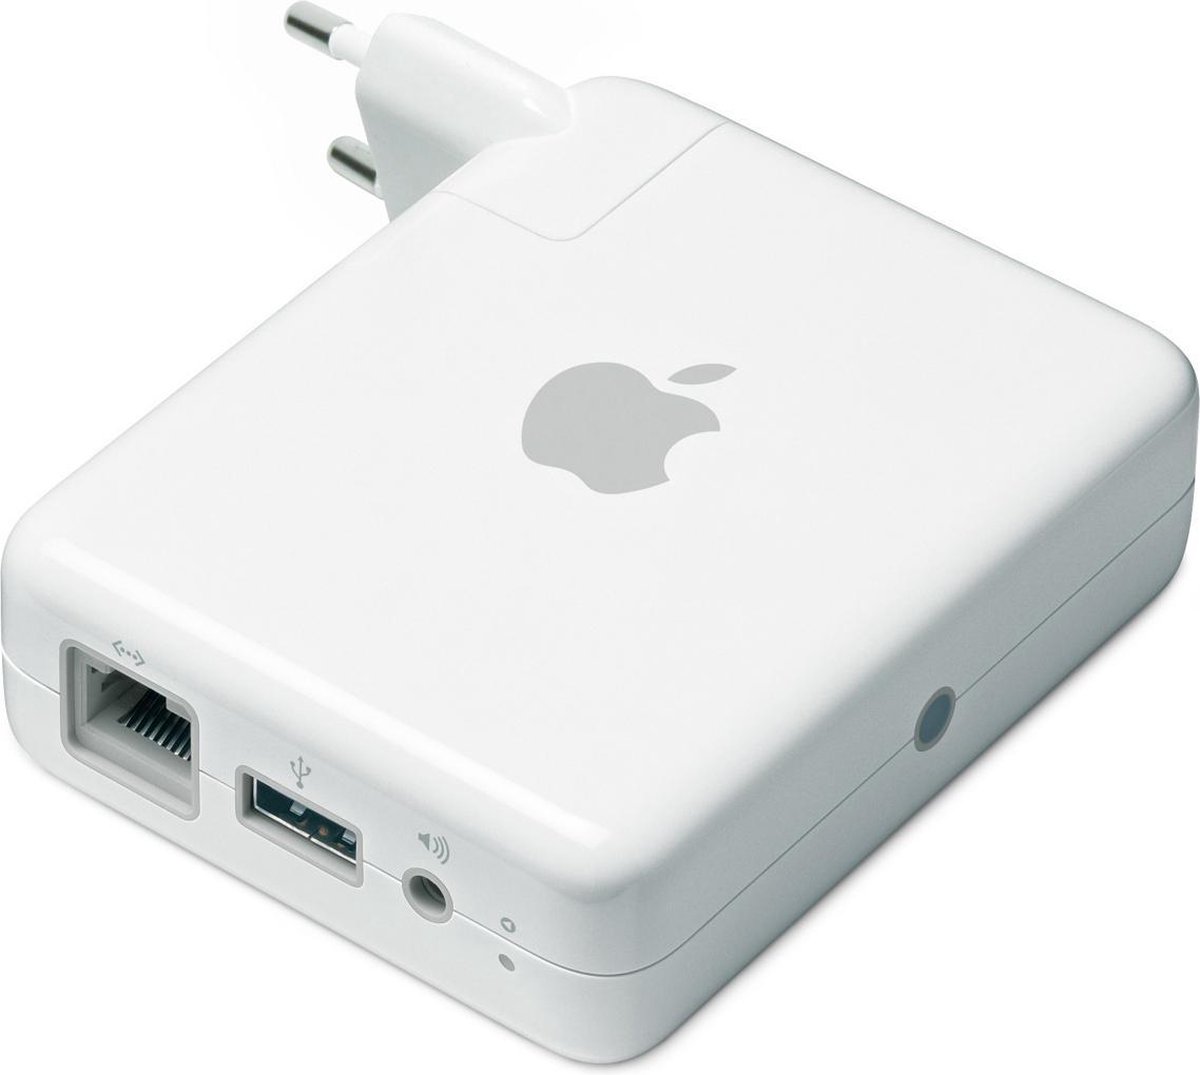 setup apple airport express with iphone